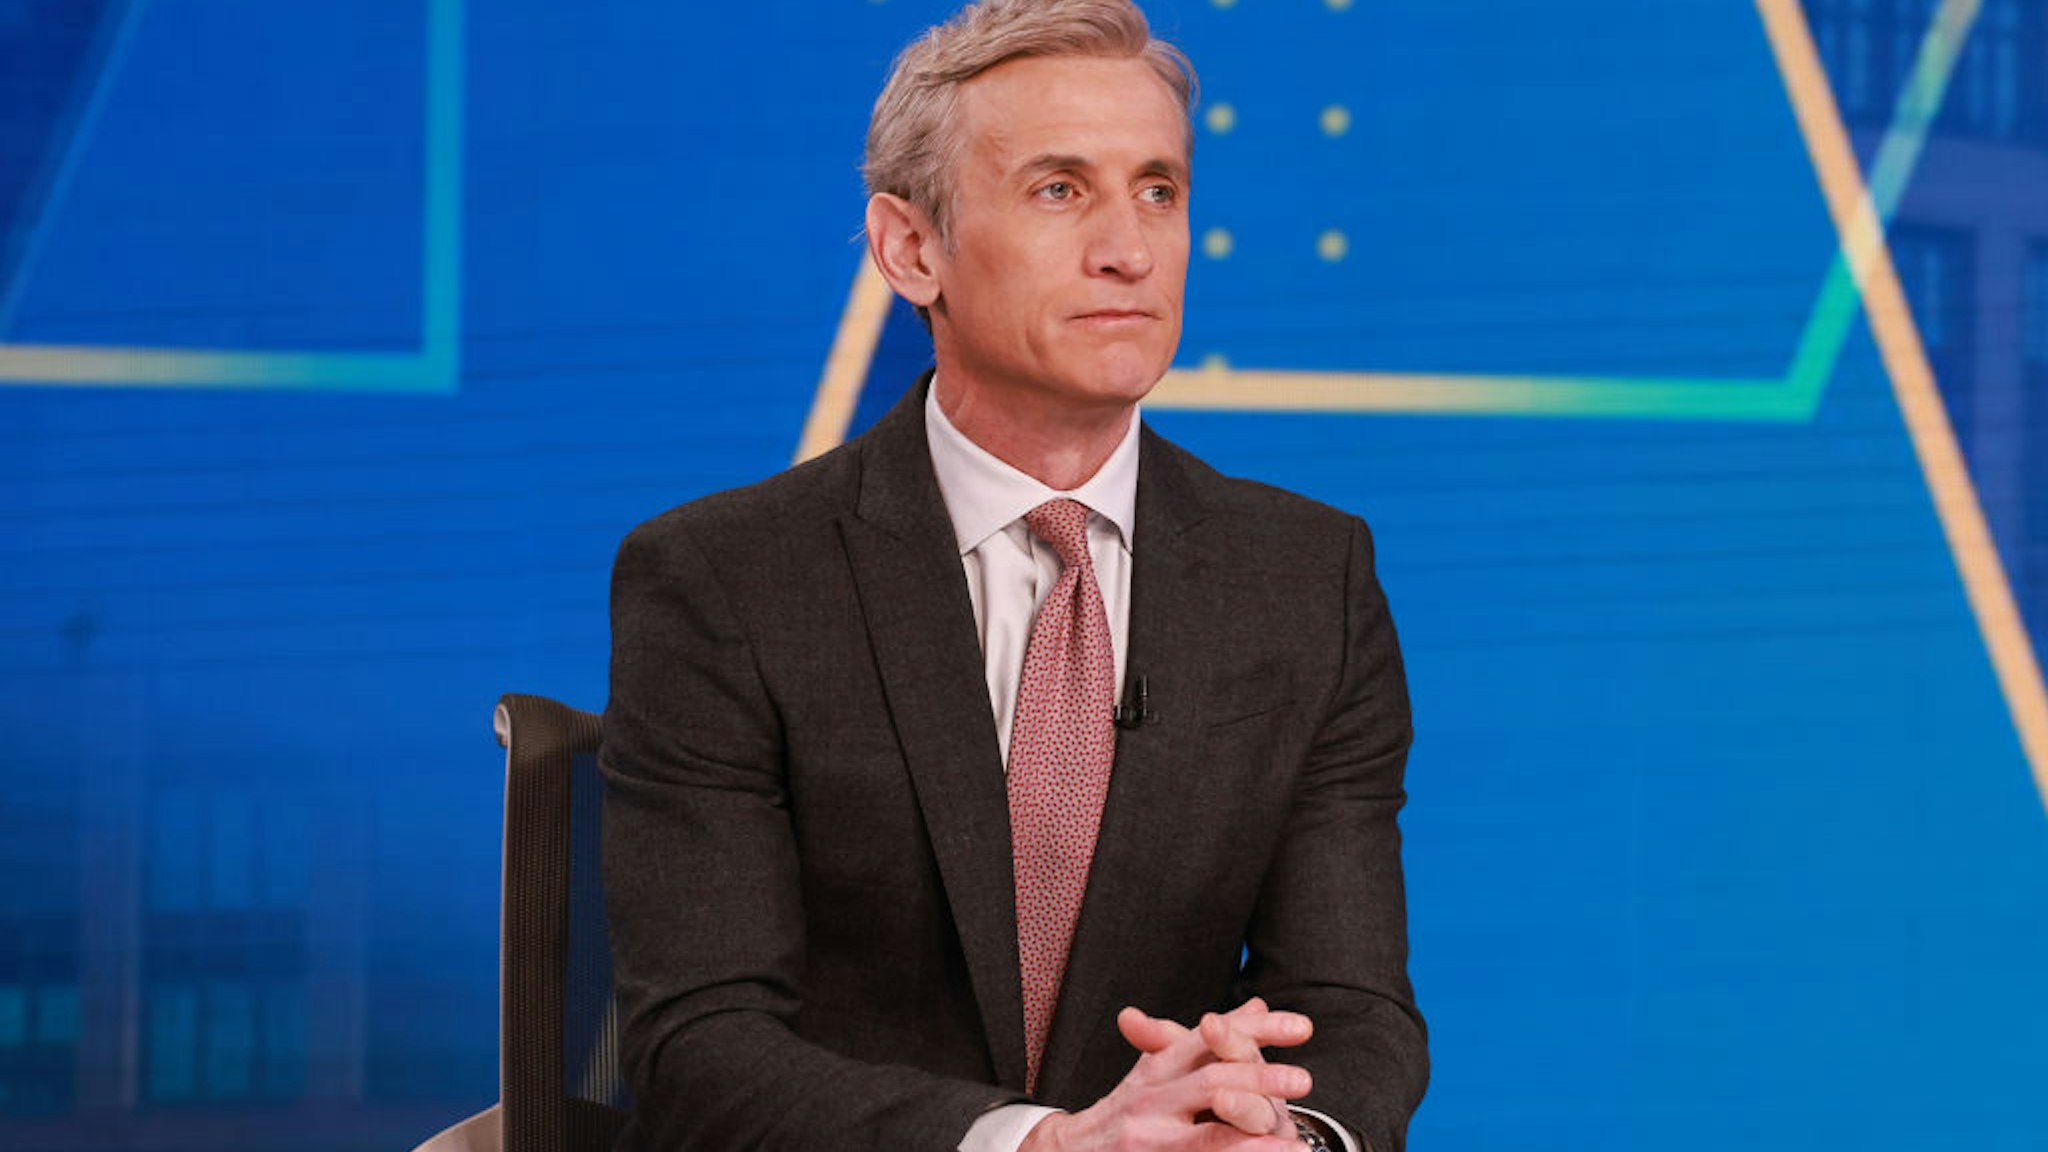 GOOD MORNING AMERICA - 3/21/23 - Show coverage of Good Morning America on Tuesday, March 21, 2023 on ABC. (Photo by Michael Le Brecht II/ABC via Getty Images) DAN ABRAMS